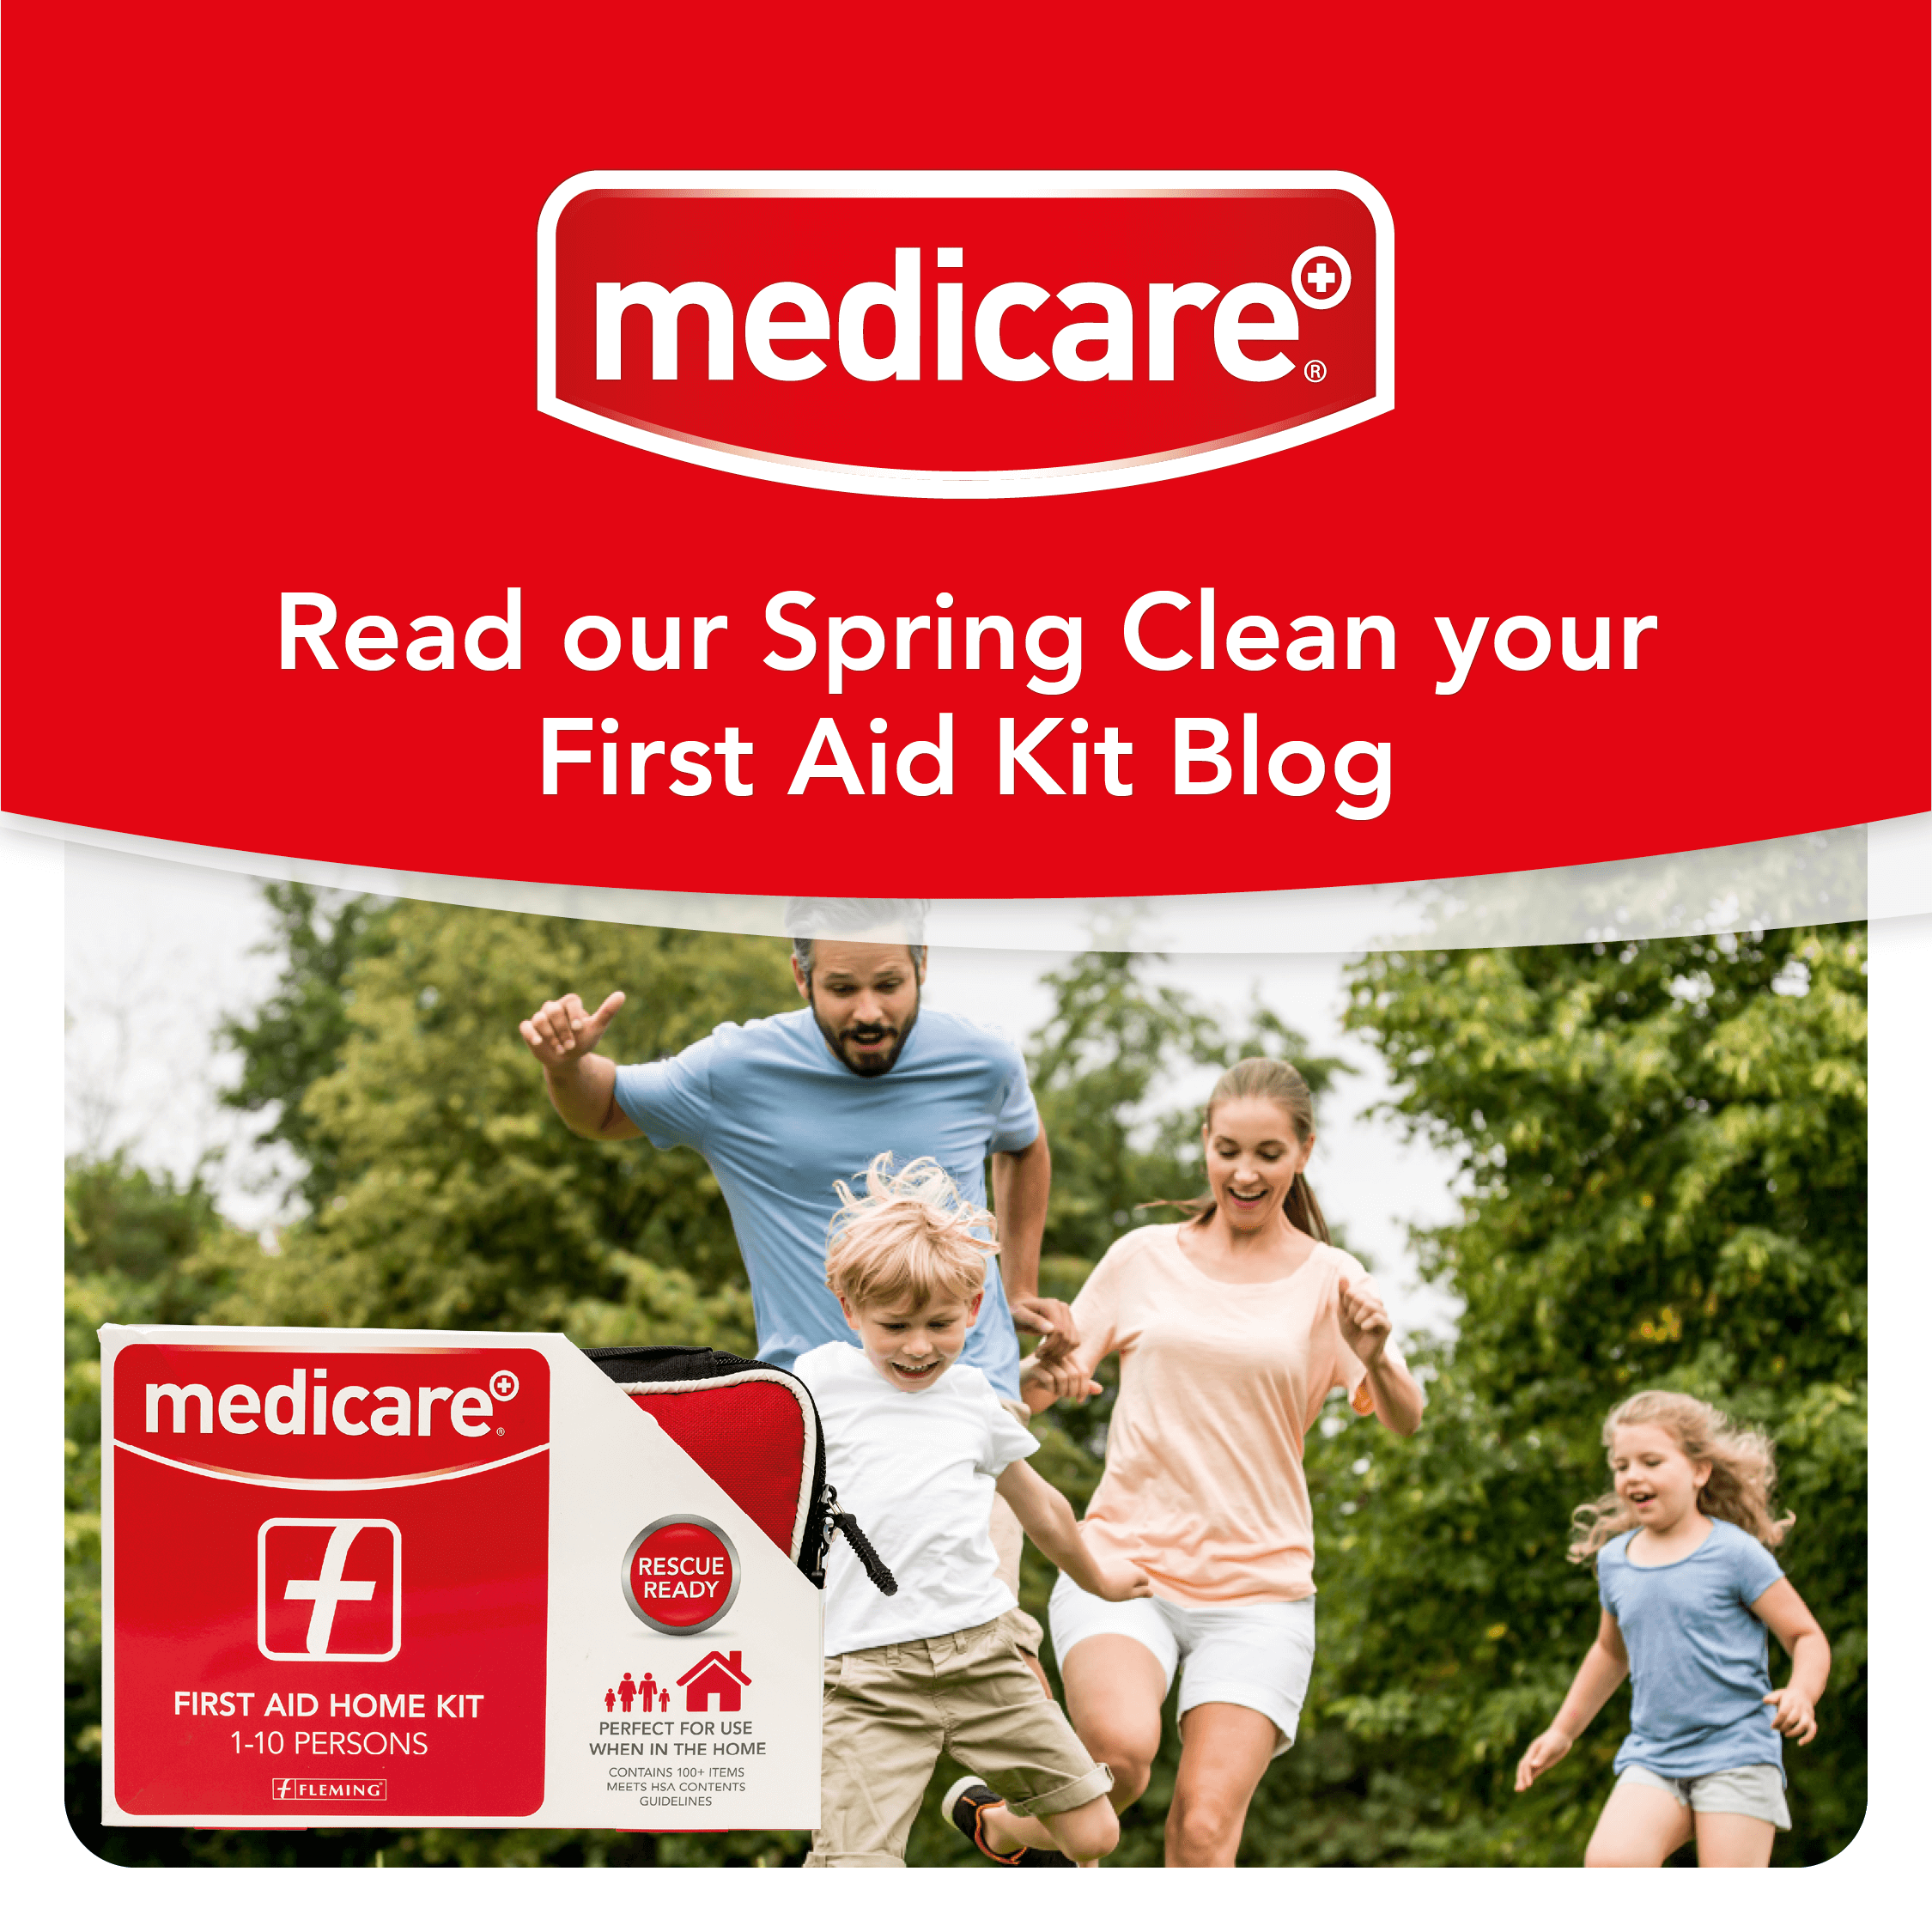 Latest Pharmacy News | Spring Clean Your Medicare First Aid Kit